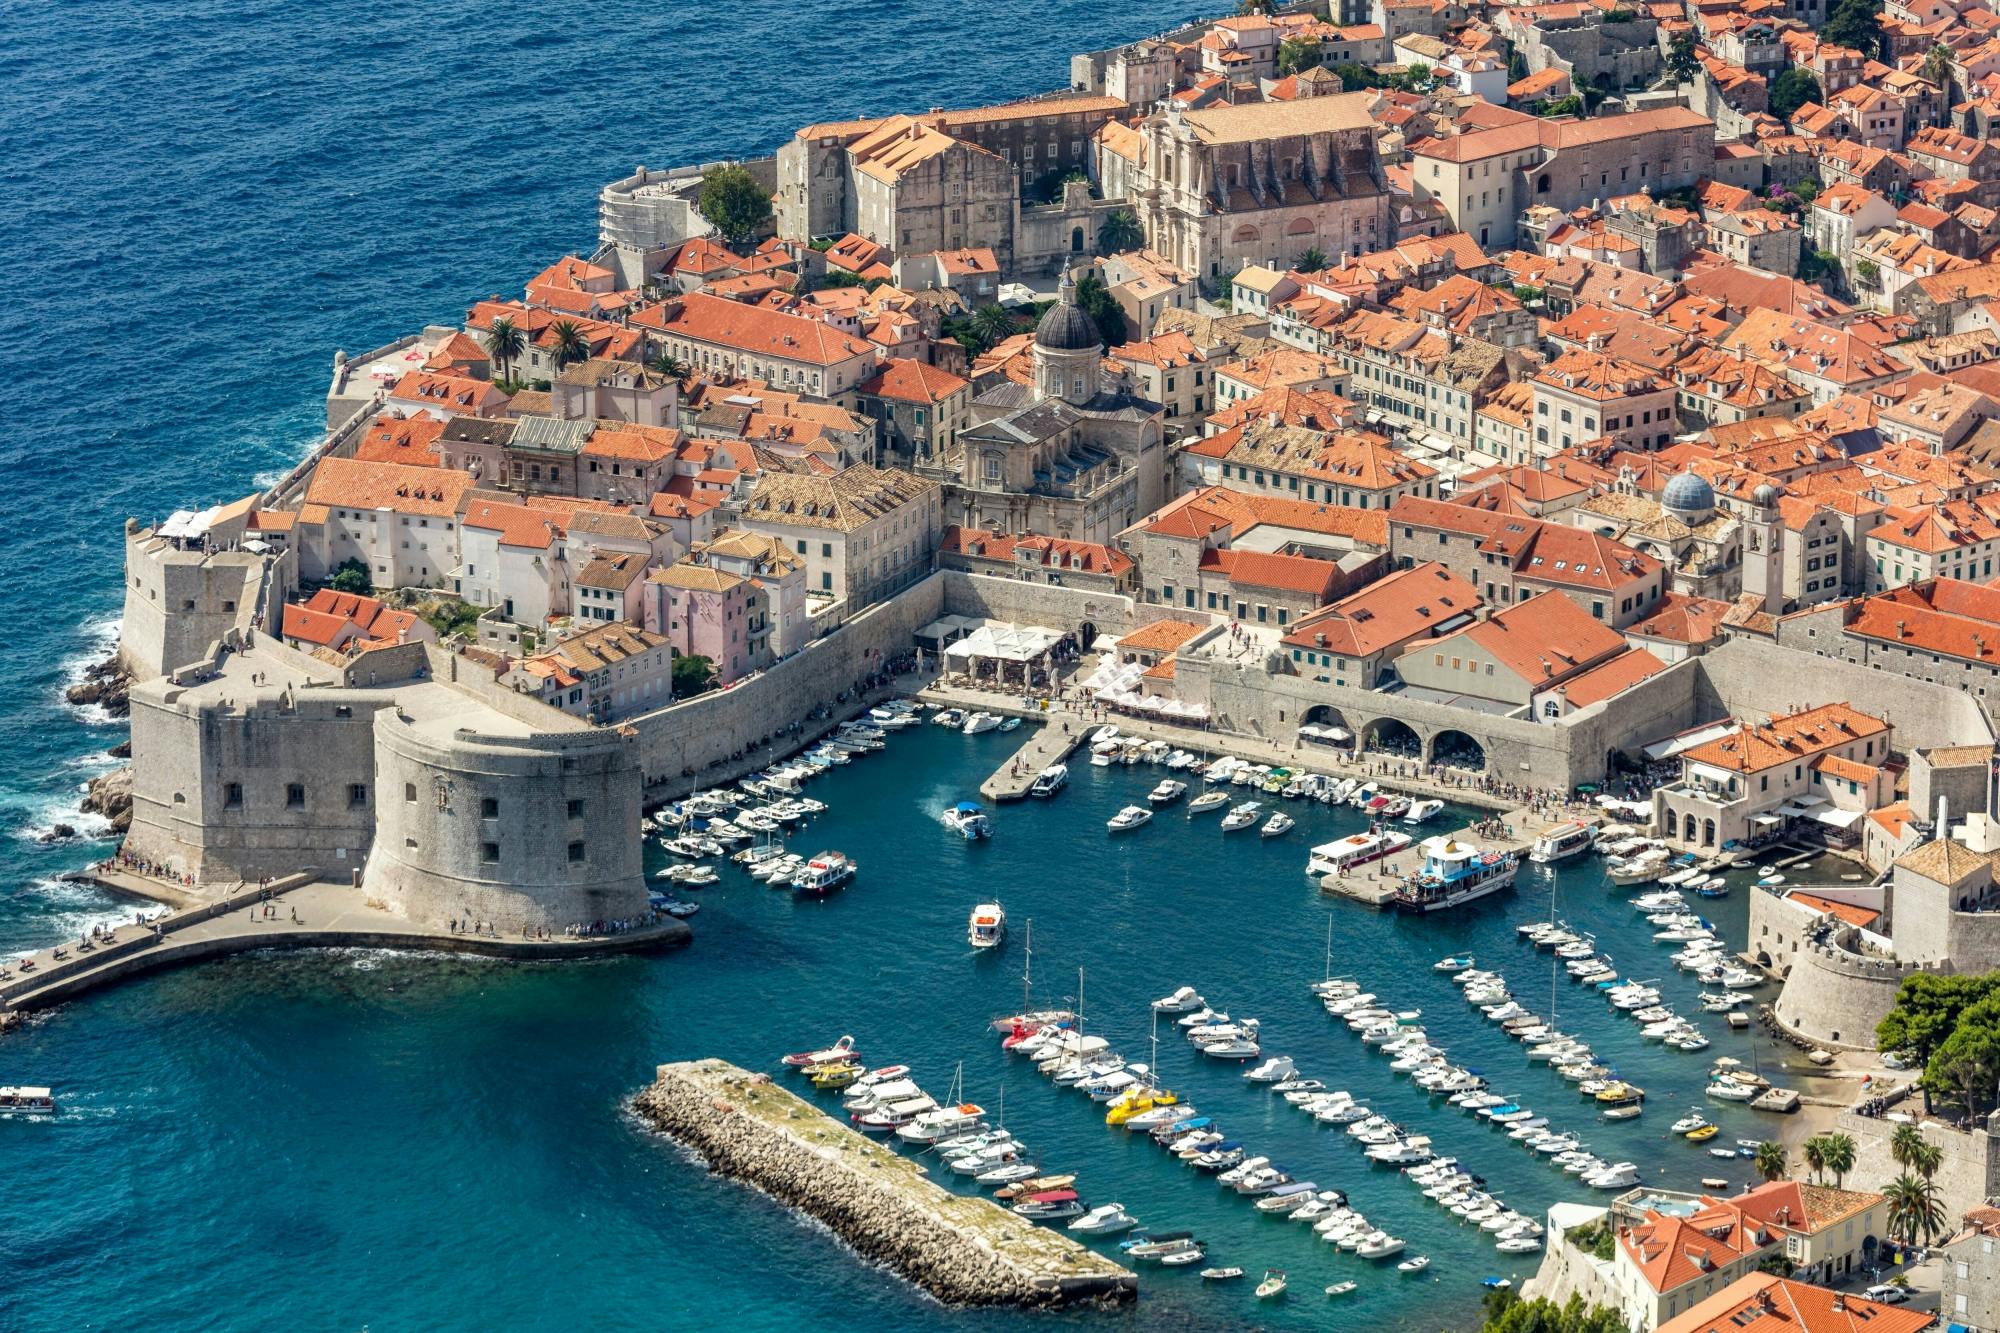 Panorama Tour of Dubrovnik with VR Experience